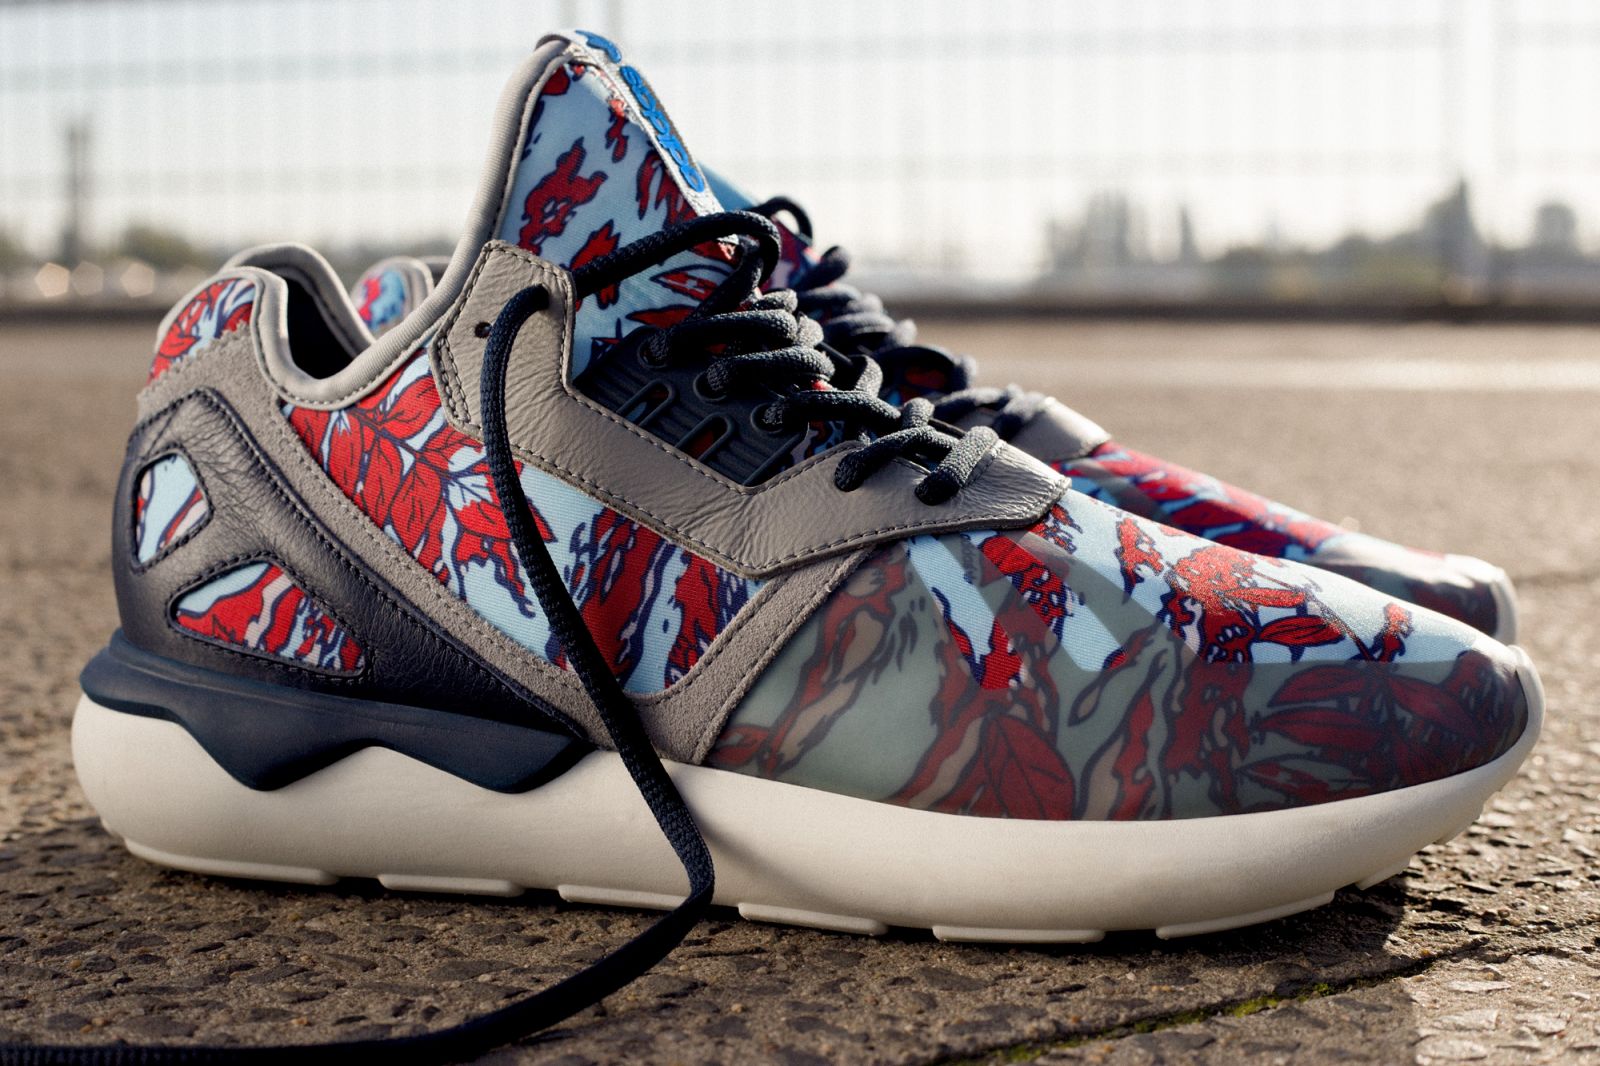 This adidas Originals Tubular Runner Is Decked Out In Zebra Stripes